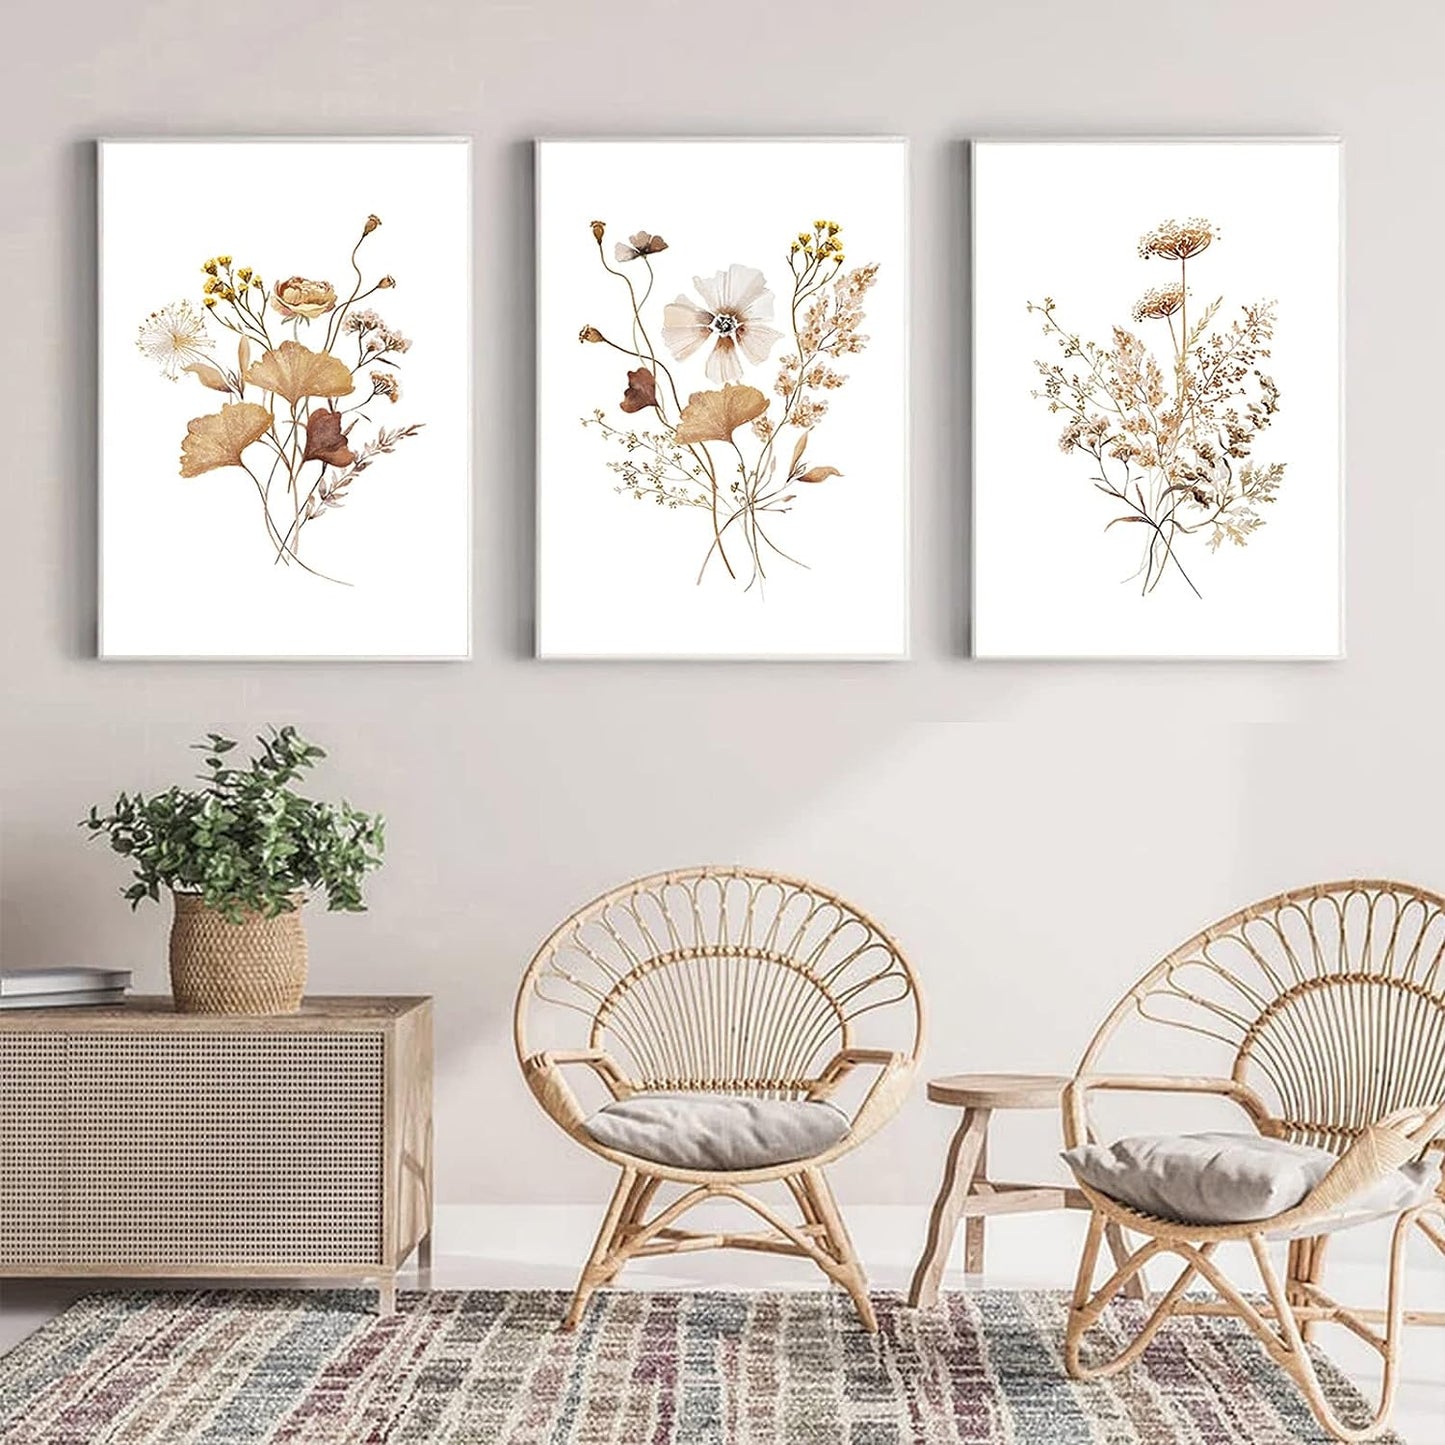 Watercolor Botanical Wall Art Vintage Floral Art Prints Wildflowers 16X24X3 Inch Set of 3 Unframed